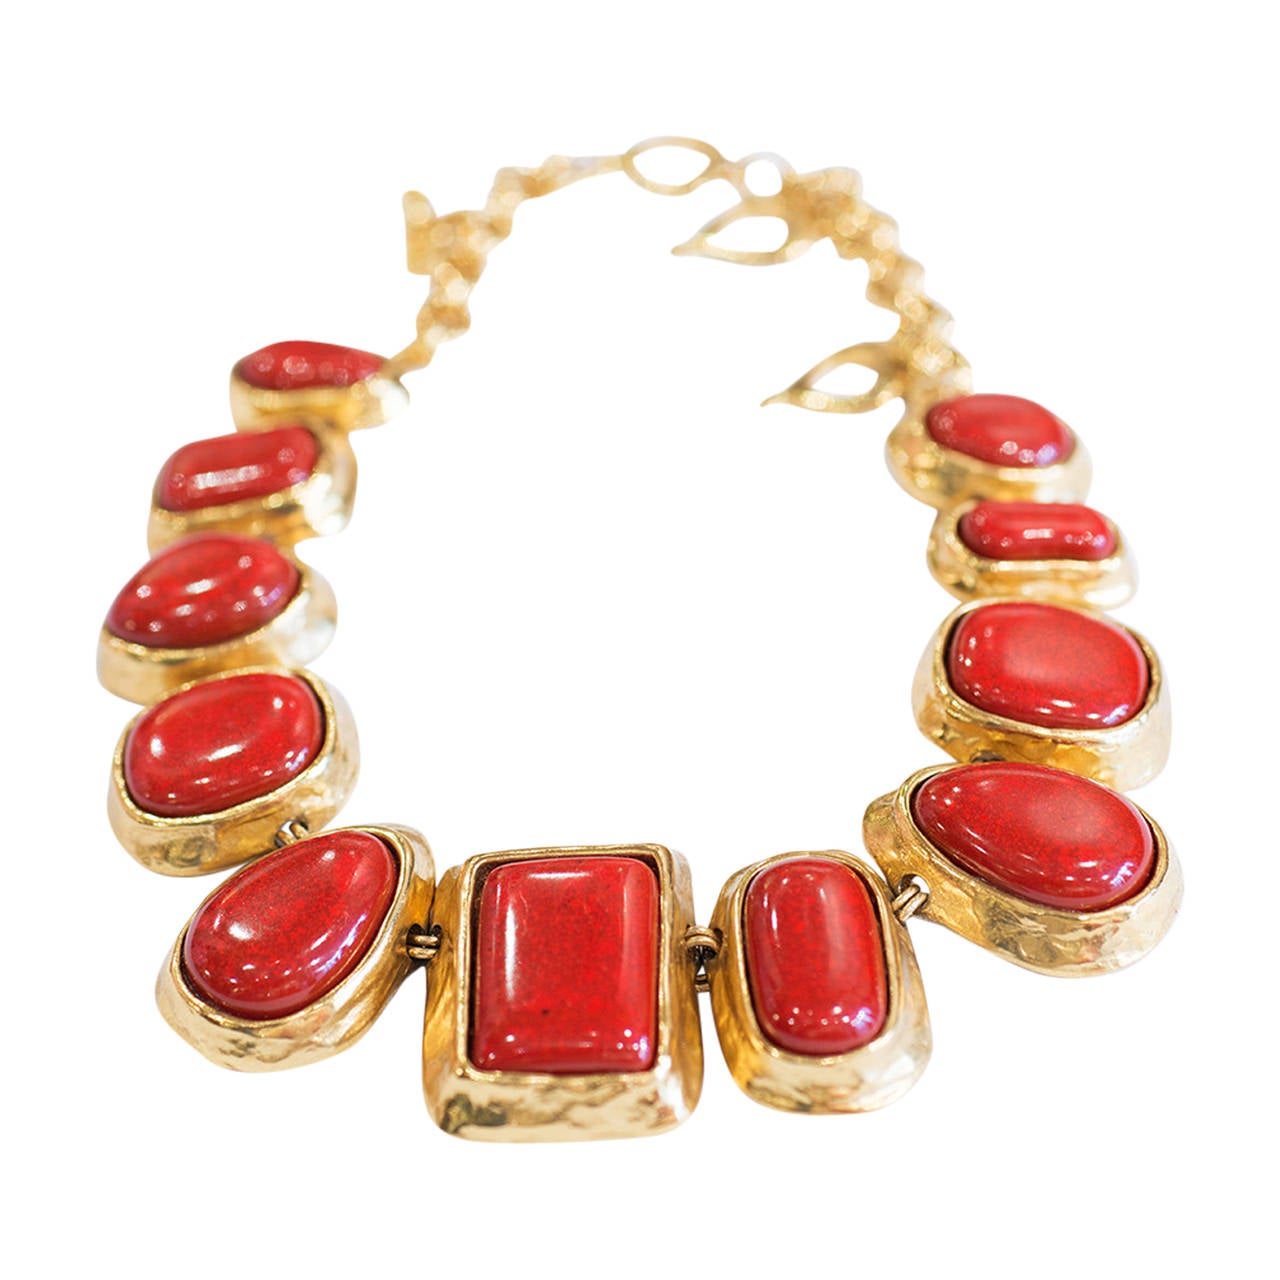 Yves Saint Laurent Vintage Costume Jewelry Red Necklace